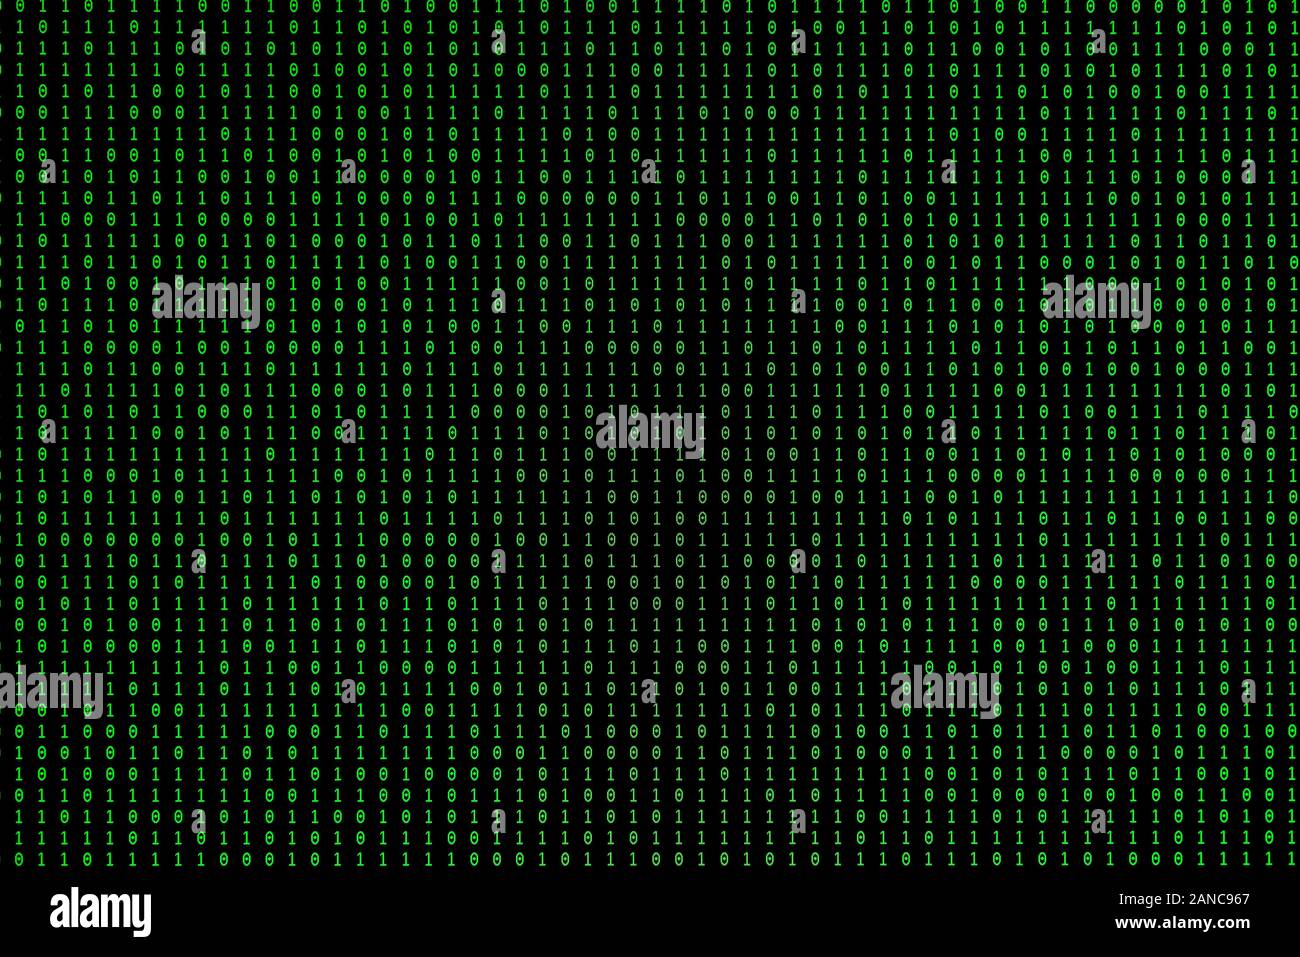 Binary Computer Code - Ones and Zeros Flickering Fast with a bit of ...